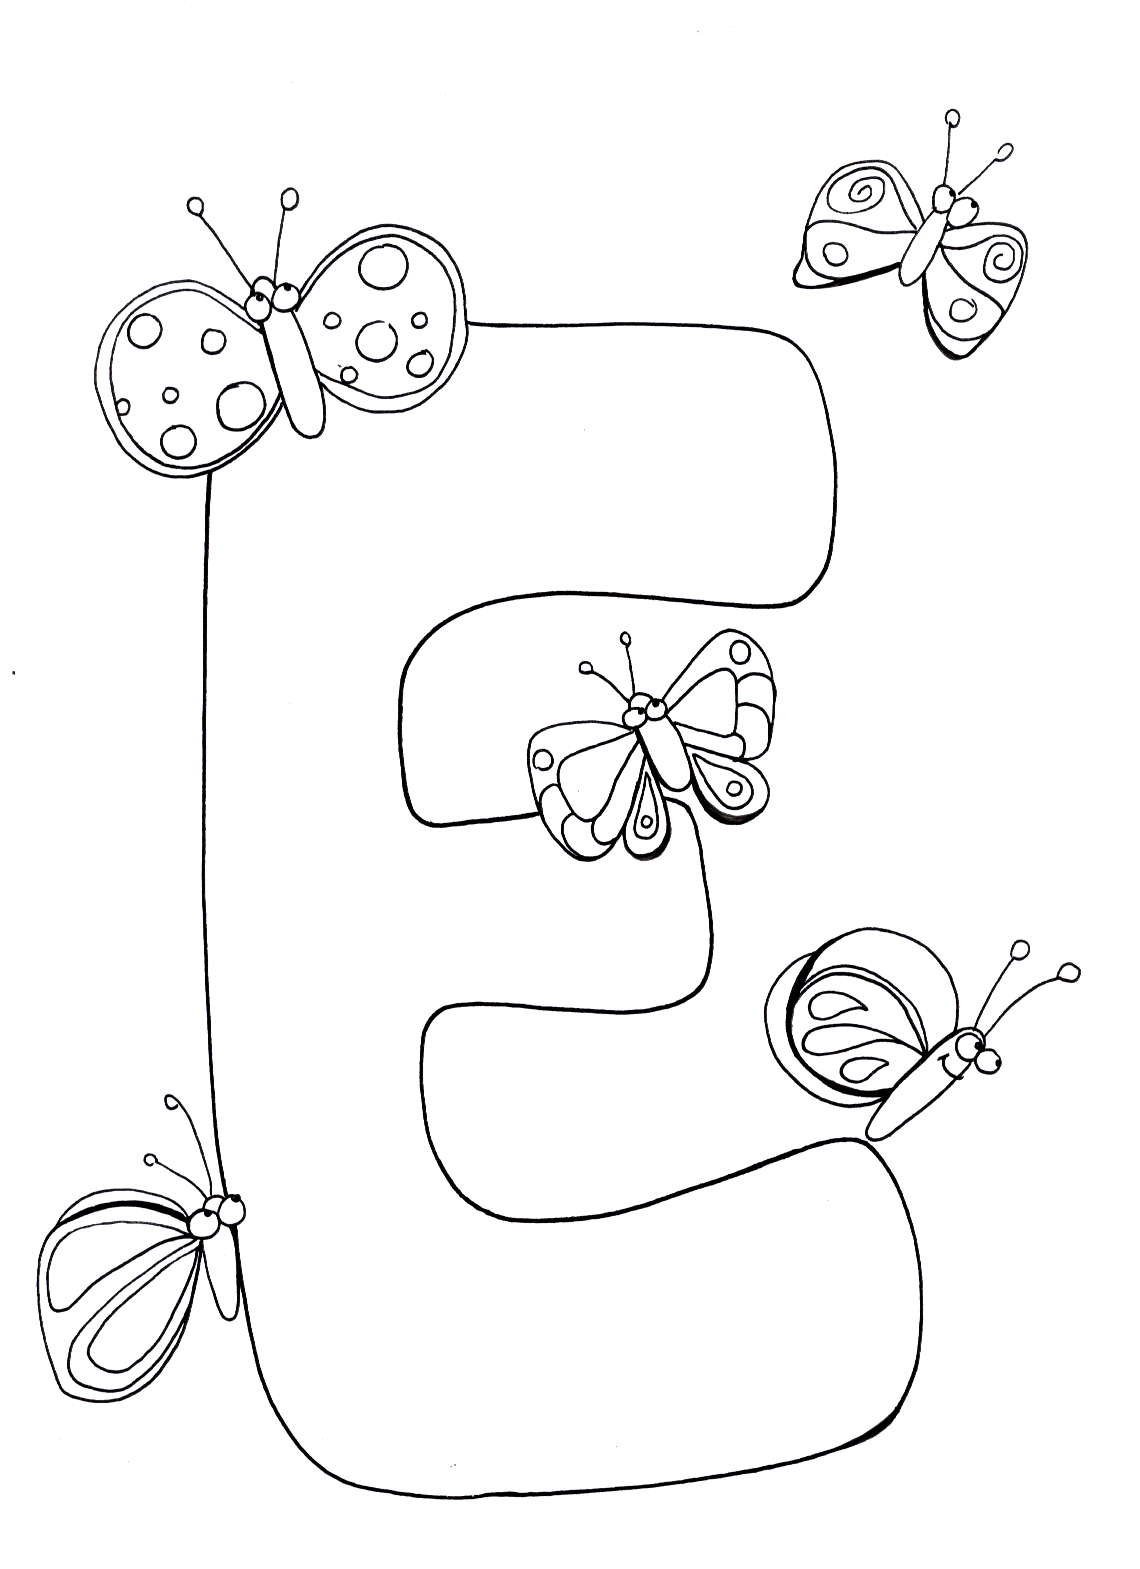 letter-e-coloring-pages-to-download-and-print-for-free